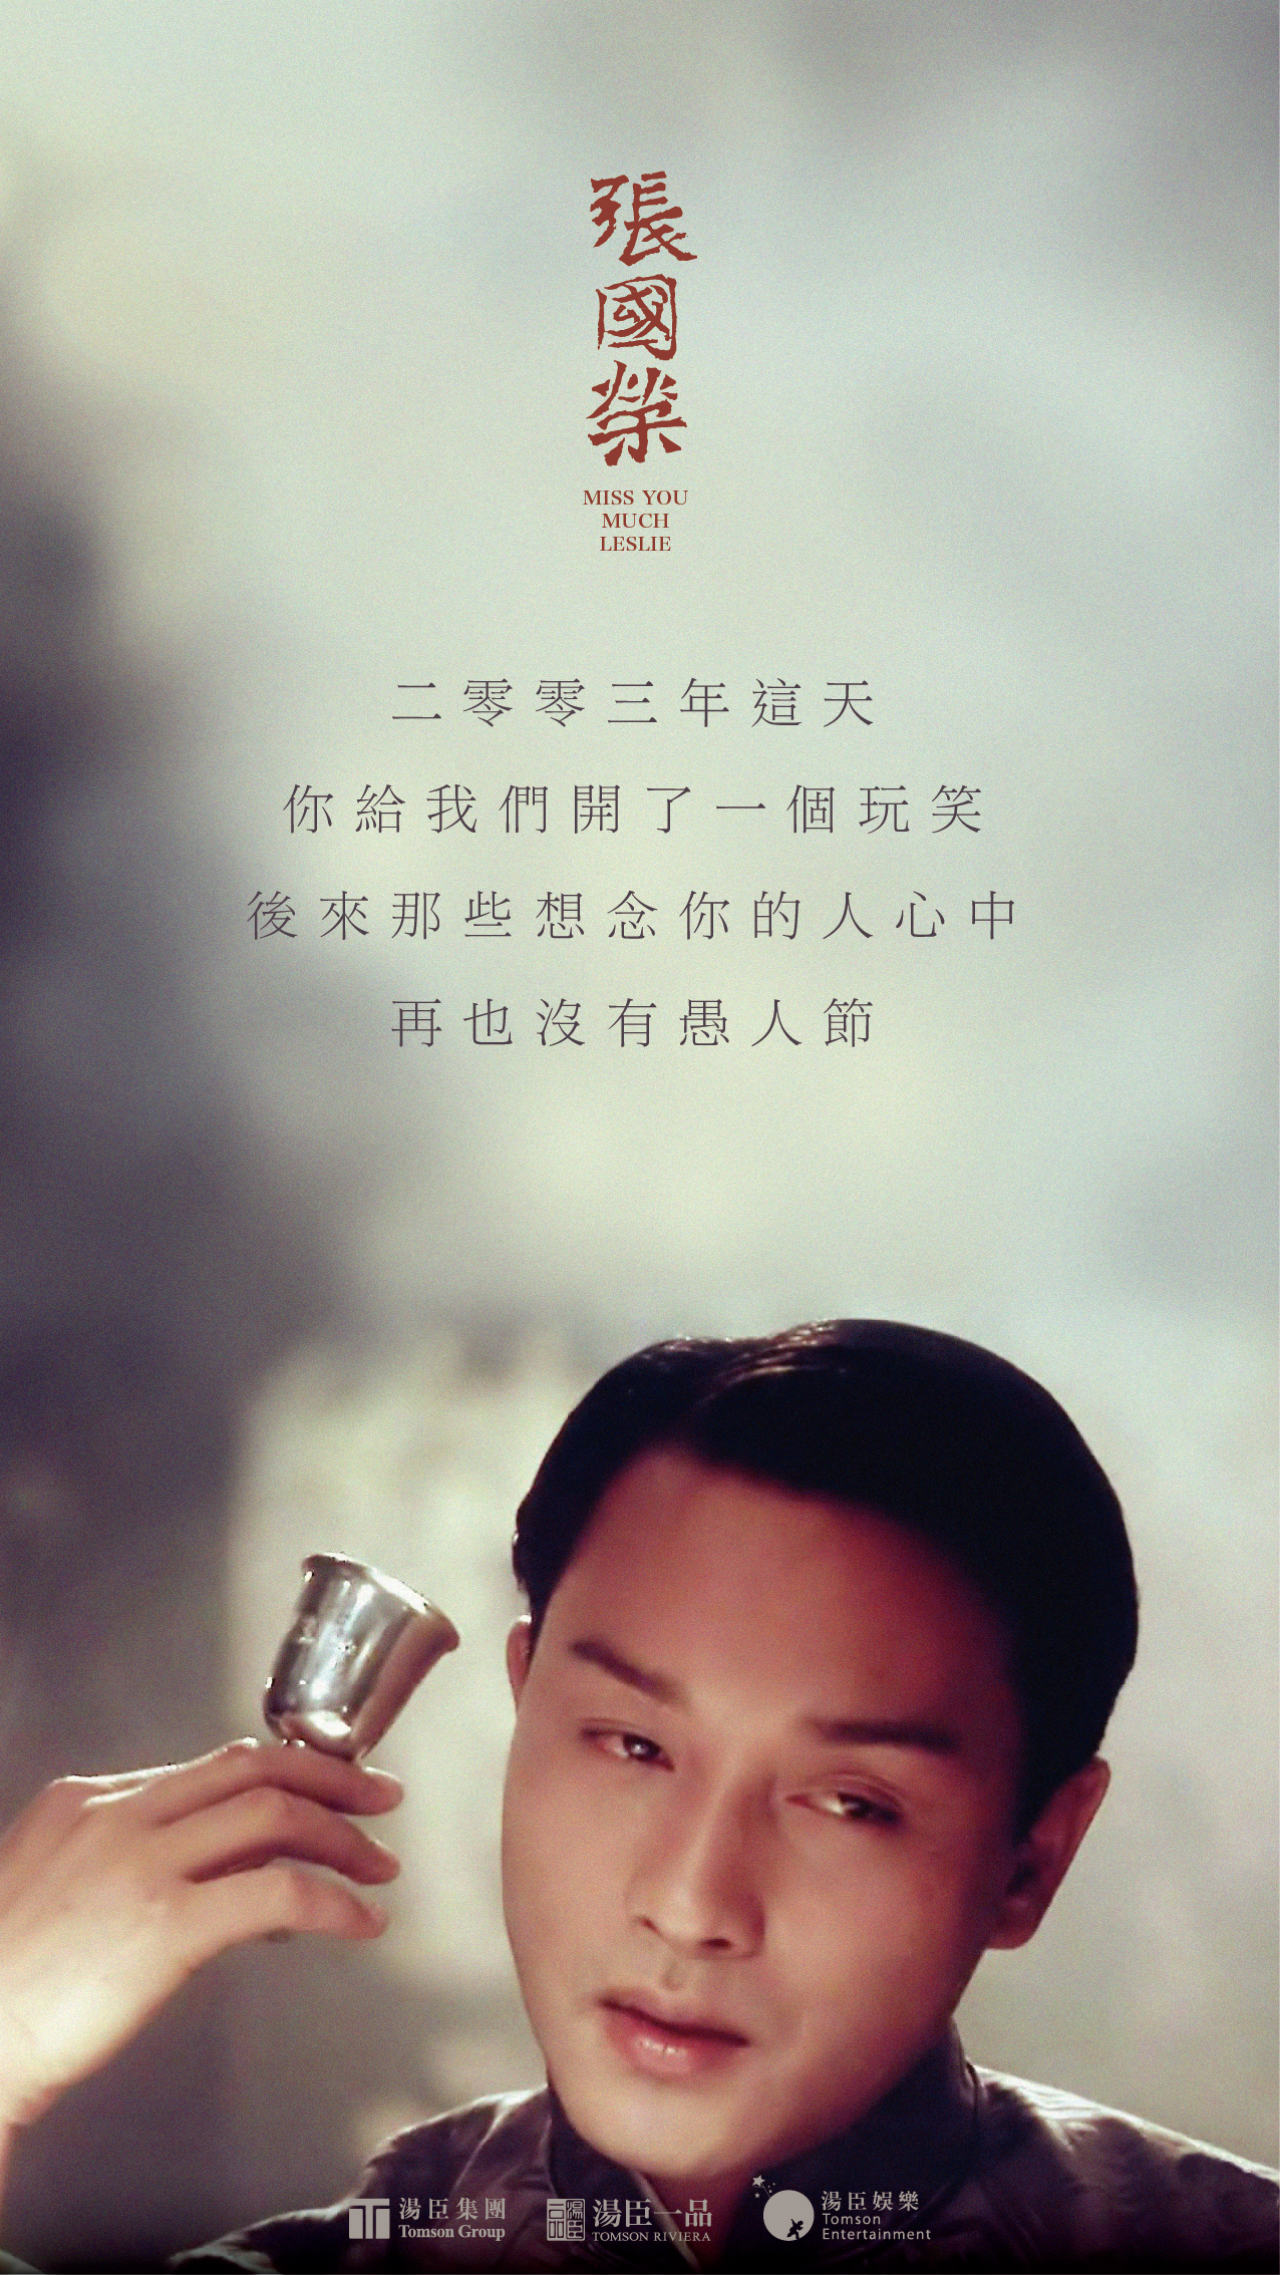 Leslie cheung